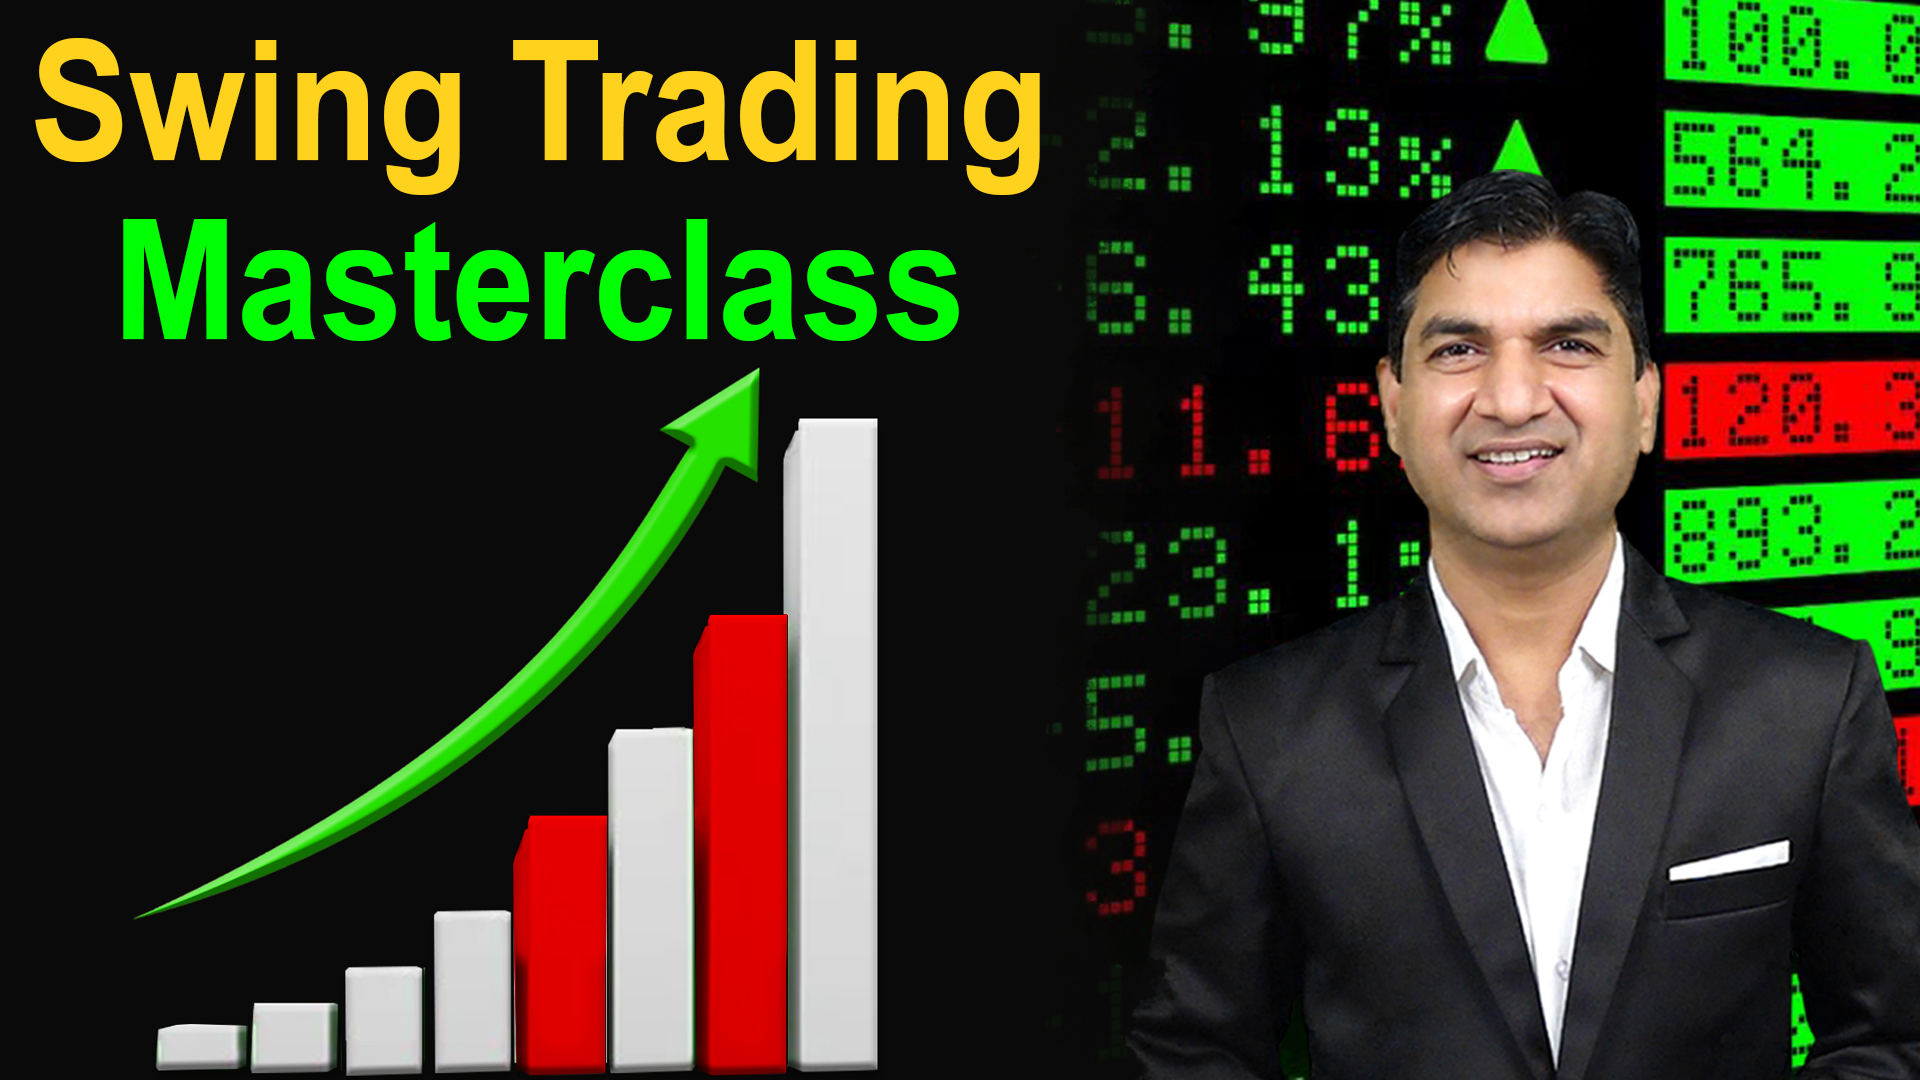 Swing Trading Masterclass(Positional Trading)